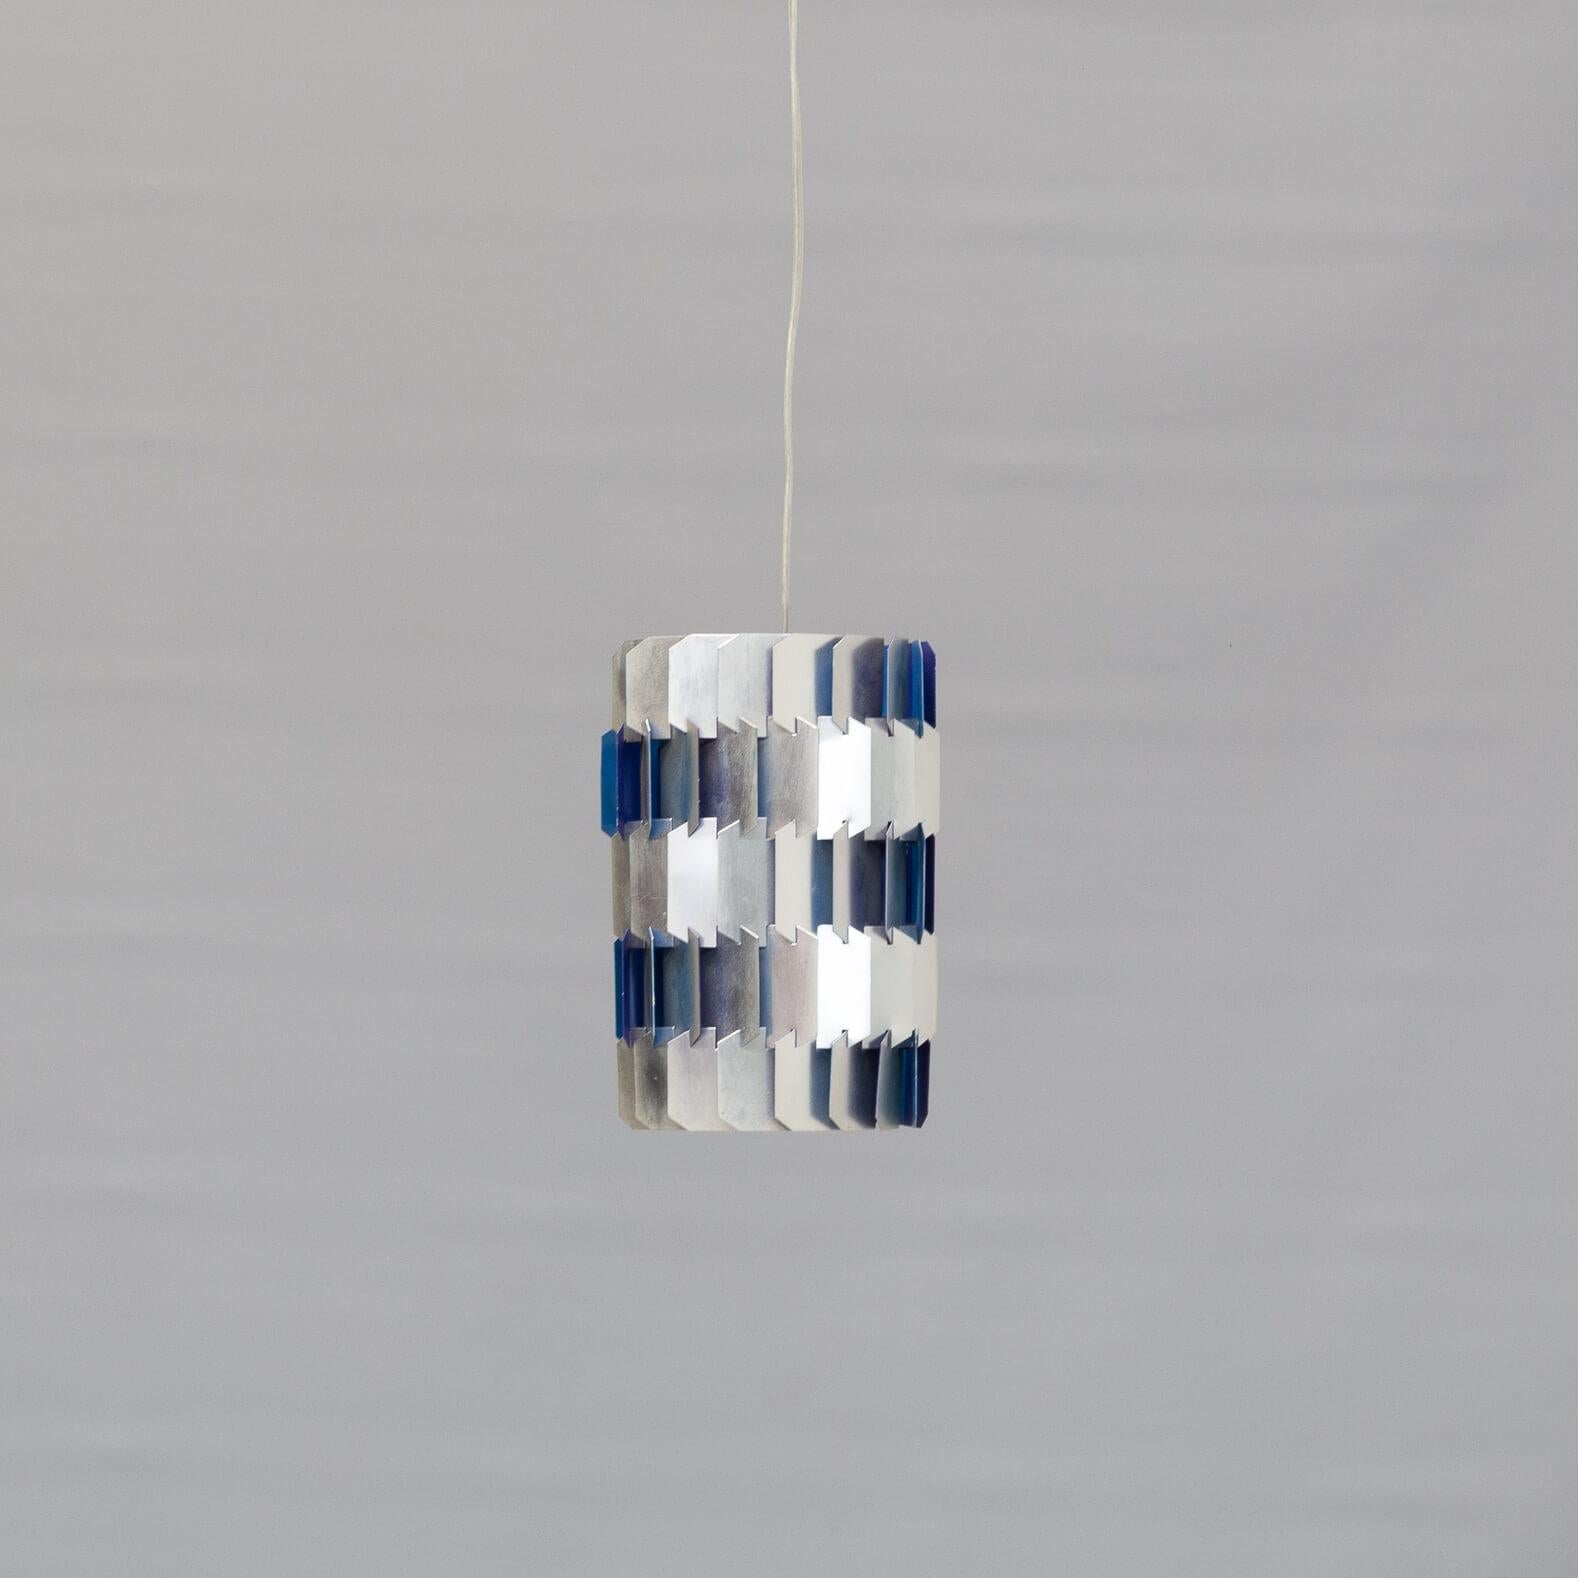 Louis Weisdorf created the ‘facet’ hanging lamp in 1963. The production by Lyfa started in 1966. A facet lamp has about 90 parts and consists 18 shades. All parts have identical shape. In 1970s Lyfa started with the Facet pop lamp. The parts in this